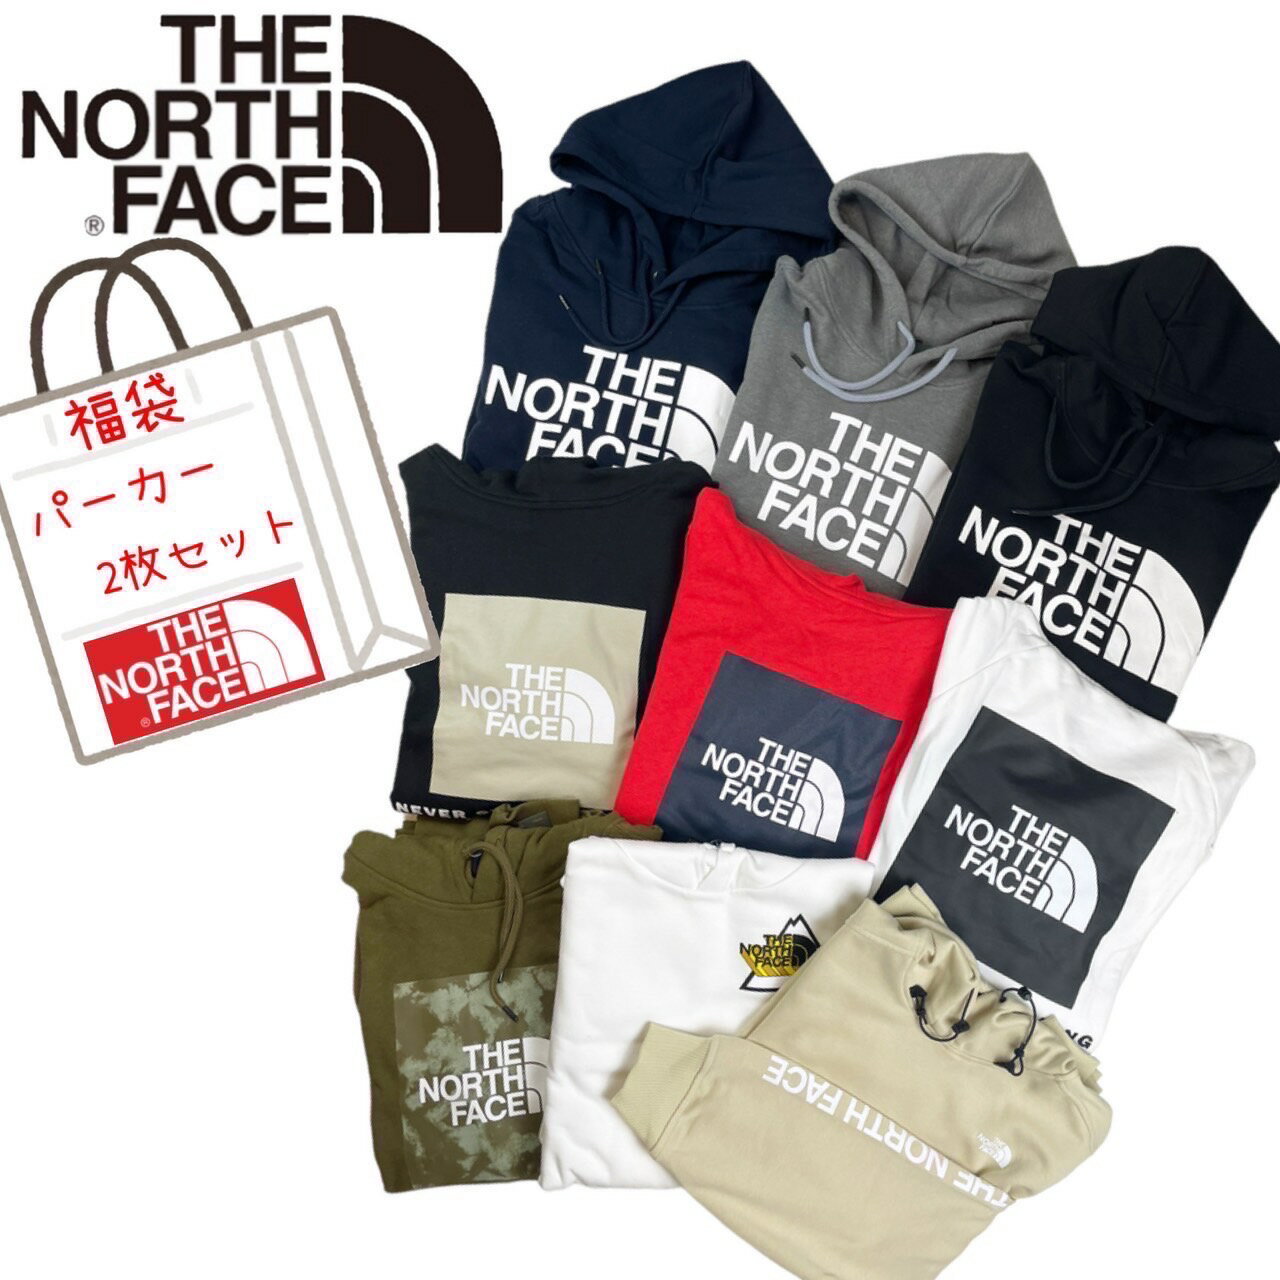  Ρե The North Face ѡ 2祻å ʡ  ڤ 2 աǥ ȥåץ THE NORTH FACE